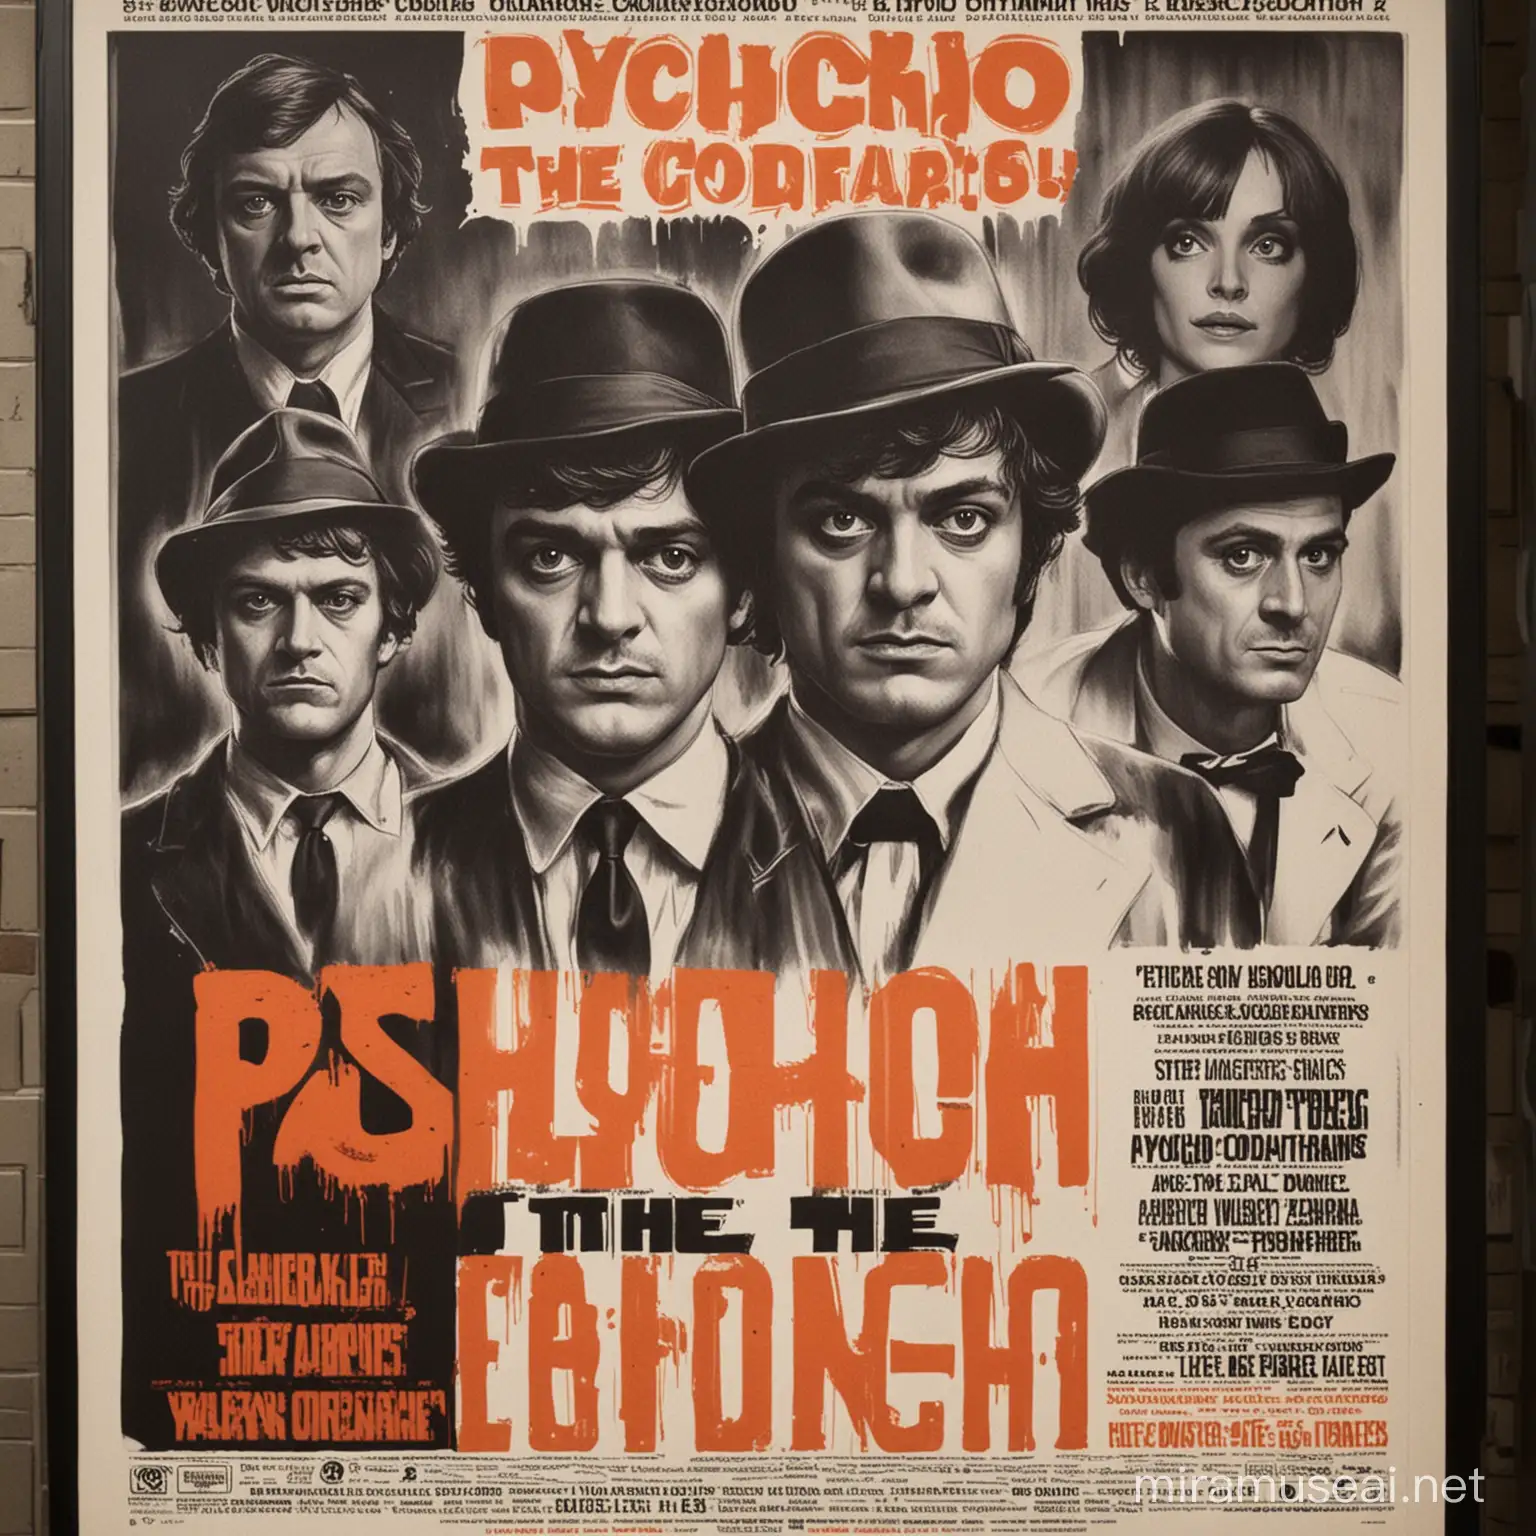 Poster of a Cinema where they will screen "A Clockwork Orange", "Psycho" and "The Godfather"